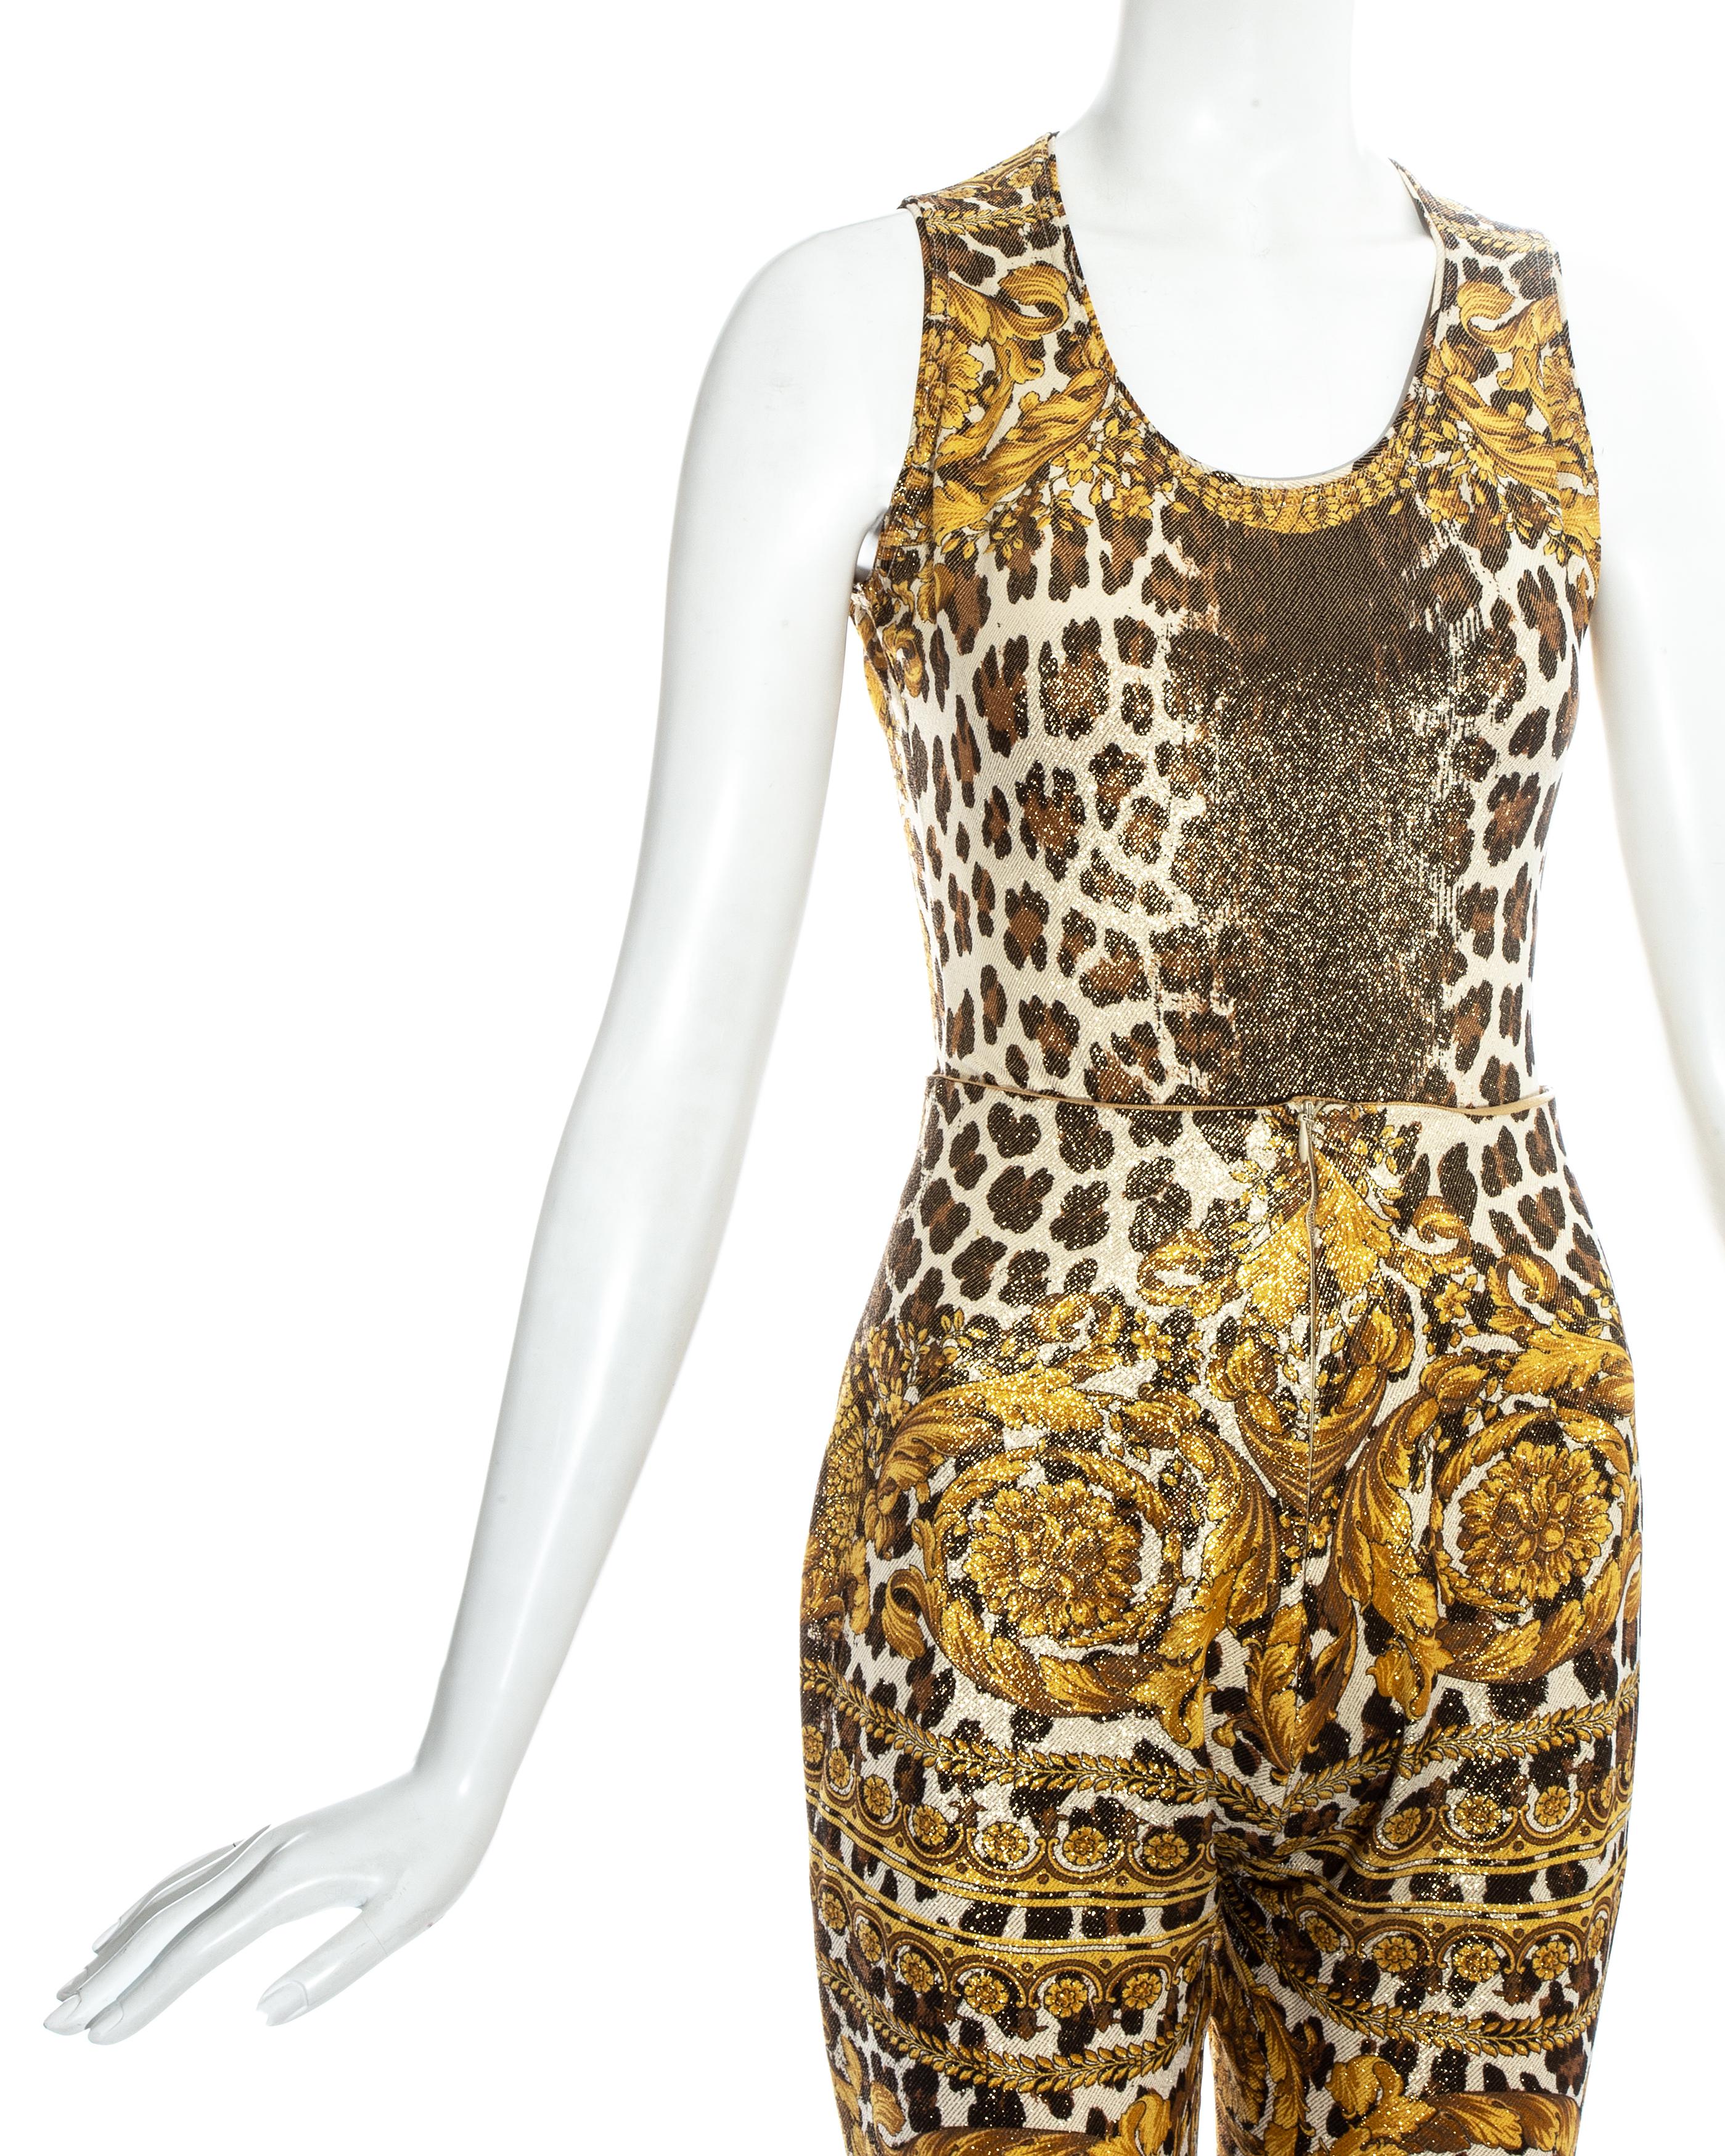 Women's or Men's Gianni Versace gold leopard printed bodysuit and pants, ss 1992 For Sale